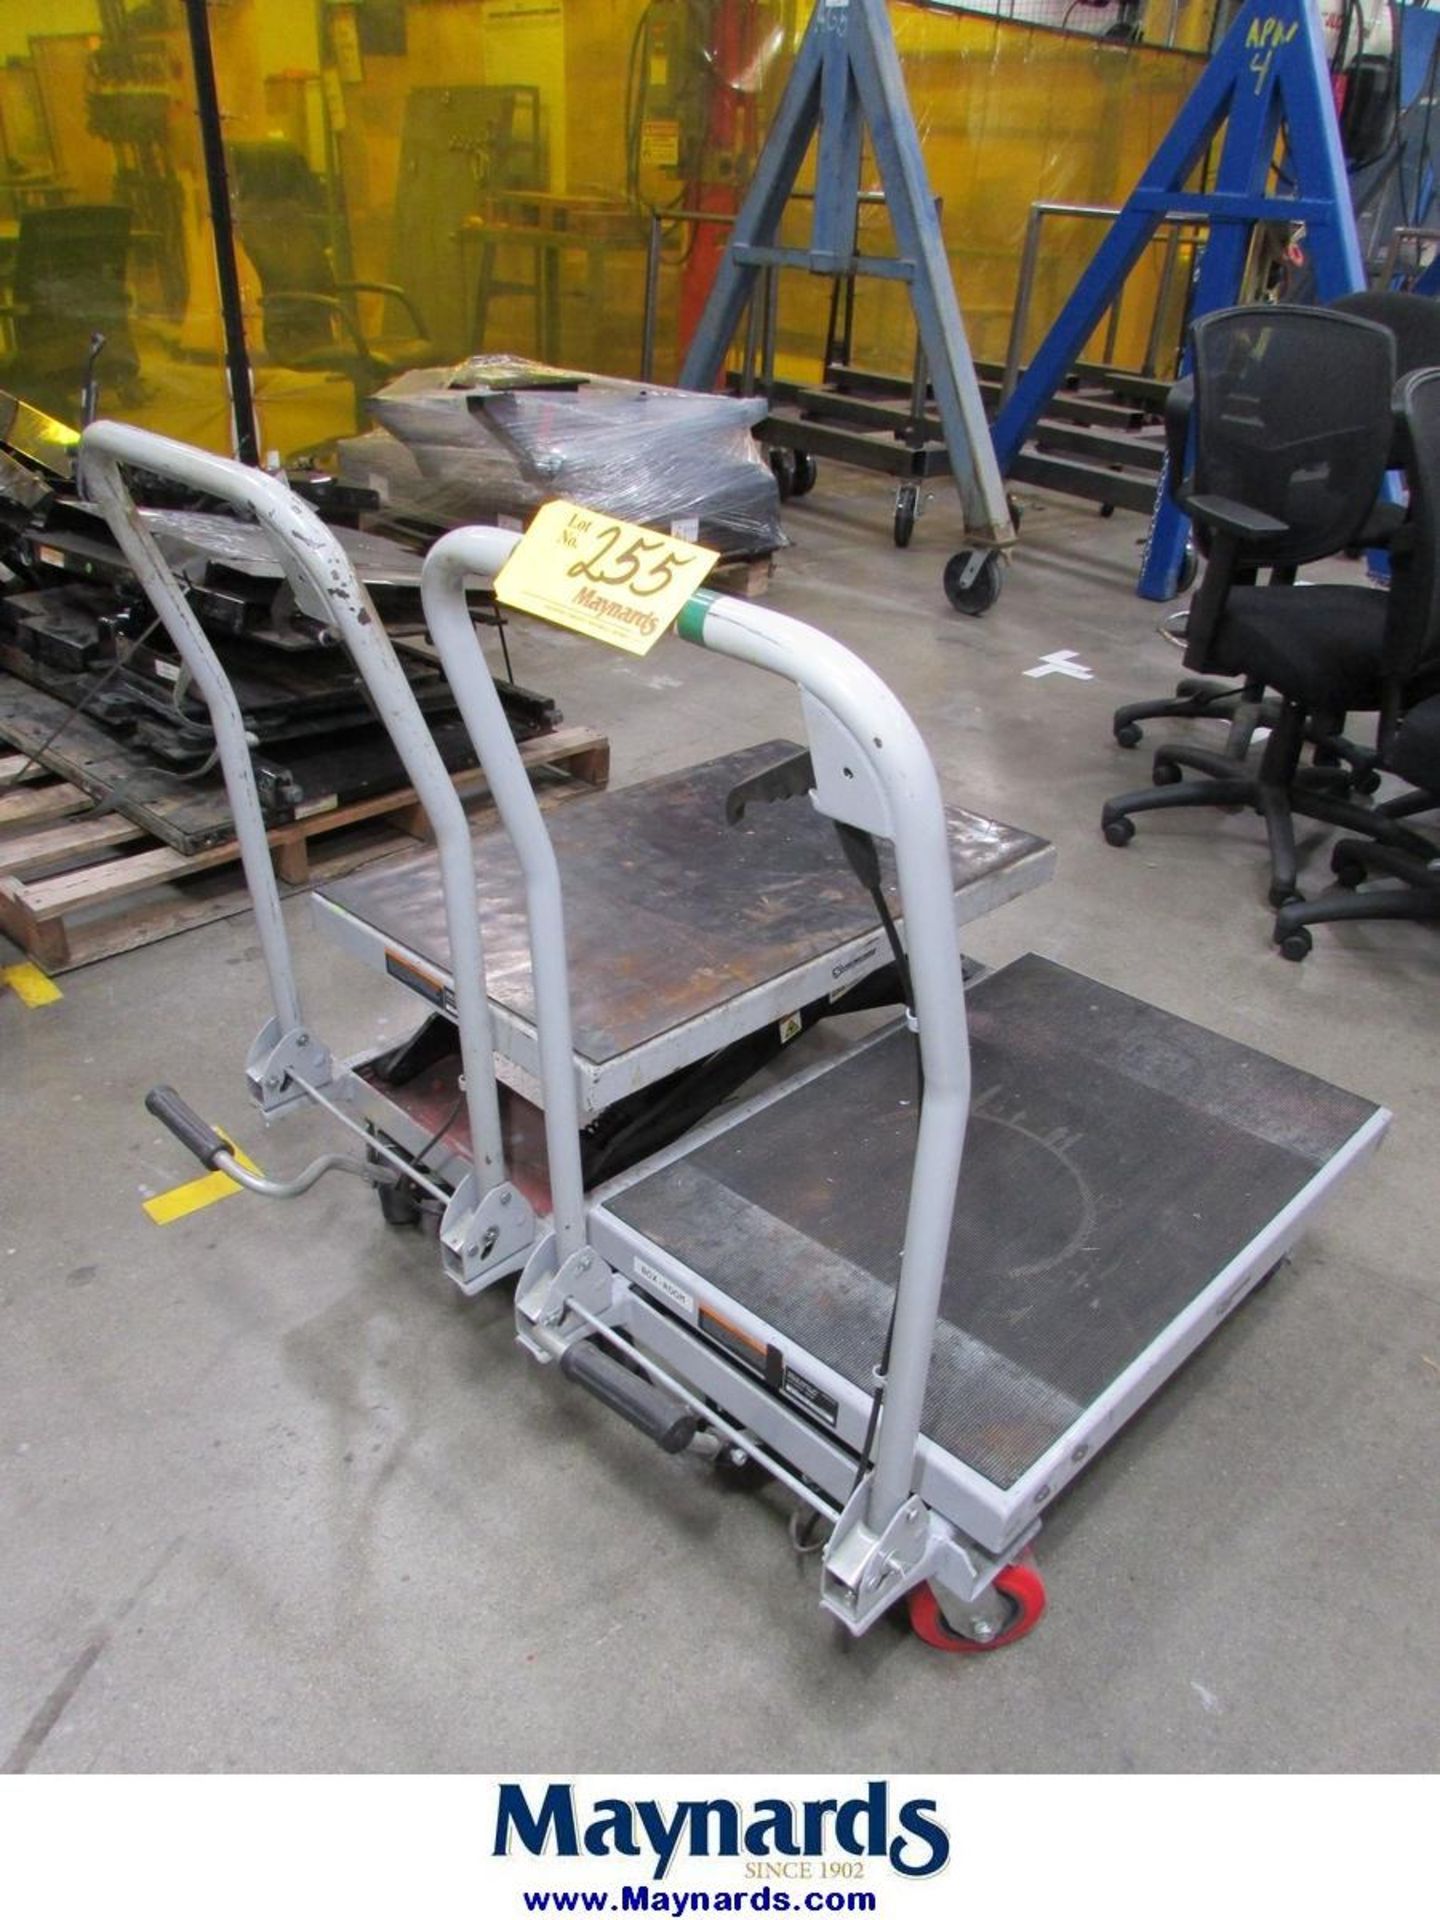 Strongway 57750 (2) 1,000 Lb. Rapid Lift Hydraulic Lift Carts - Image 2 of 4